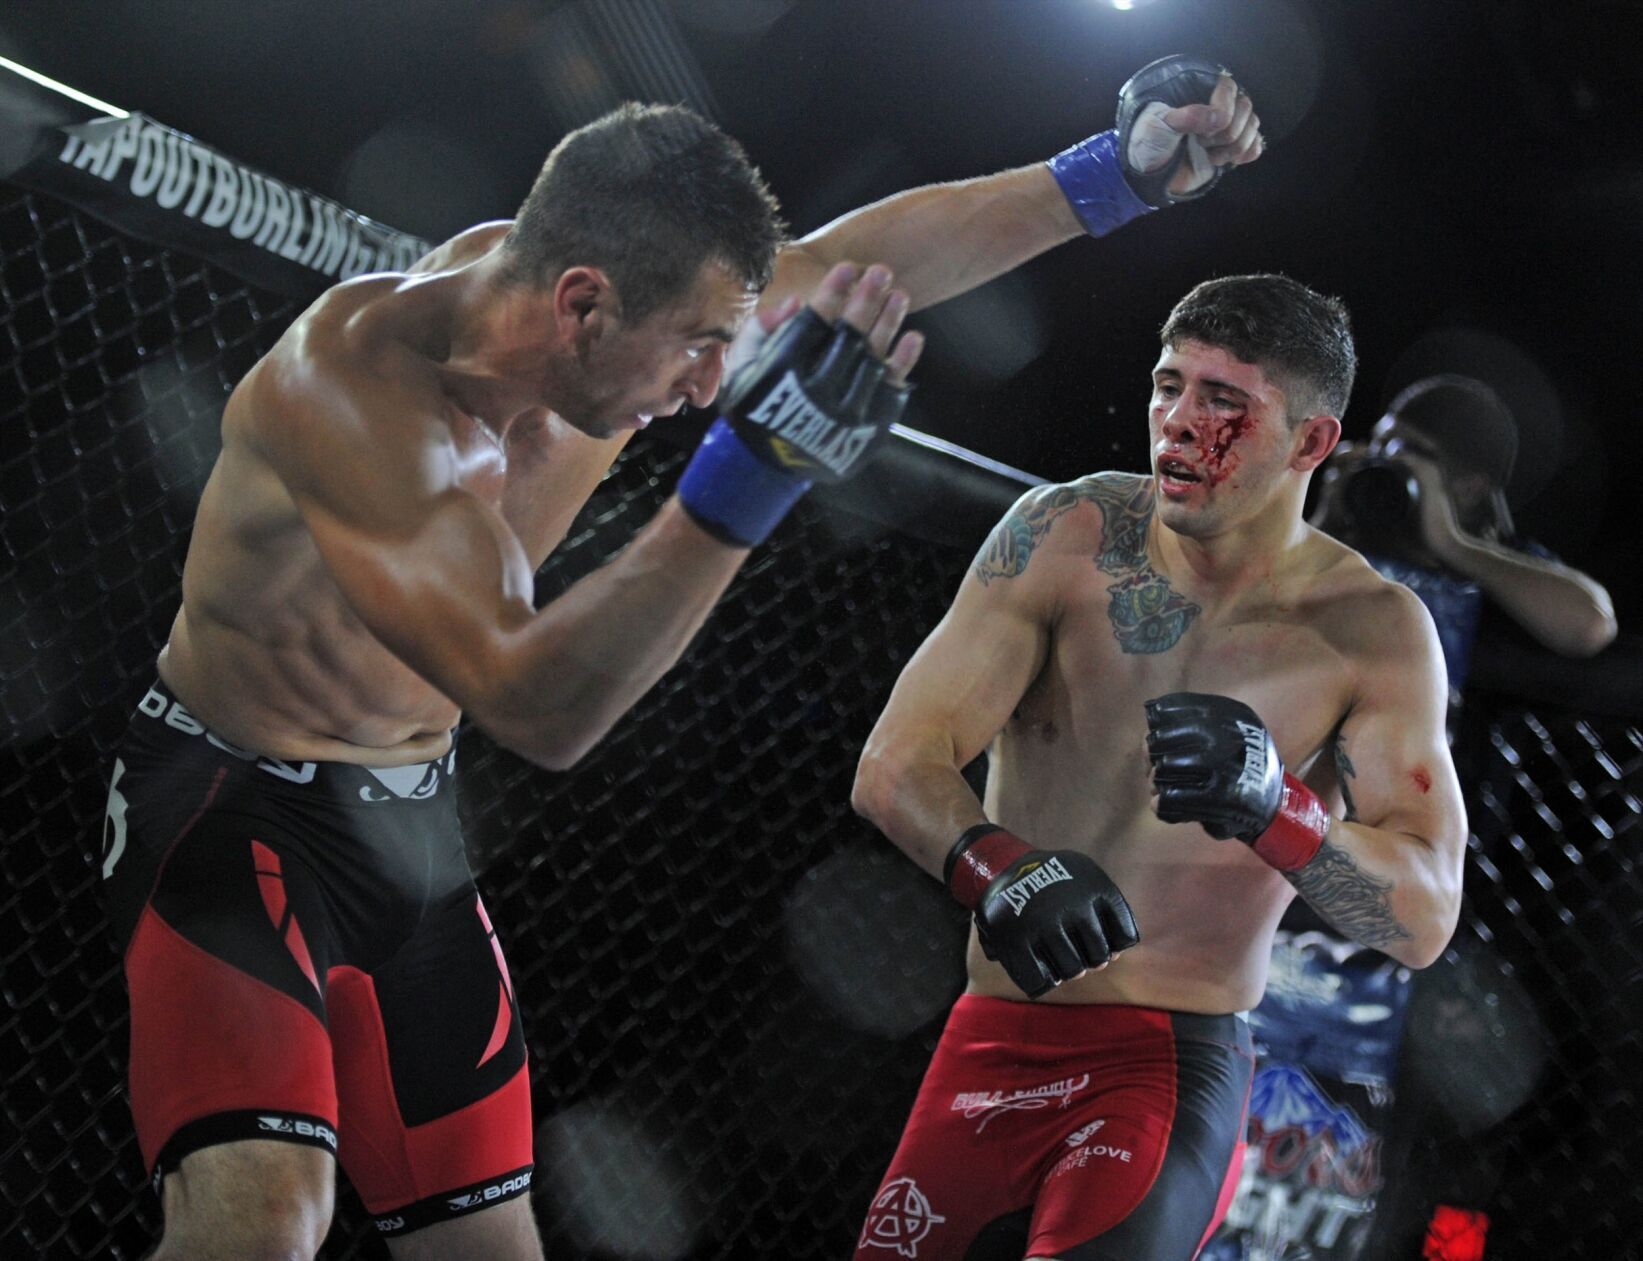 Blood, sweat and cheers Burlingtons Assenza scores knockout win at hometown MMA event